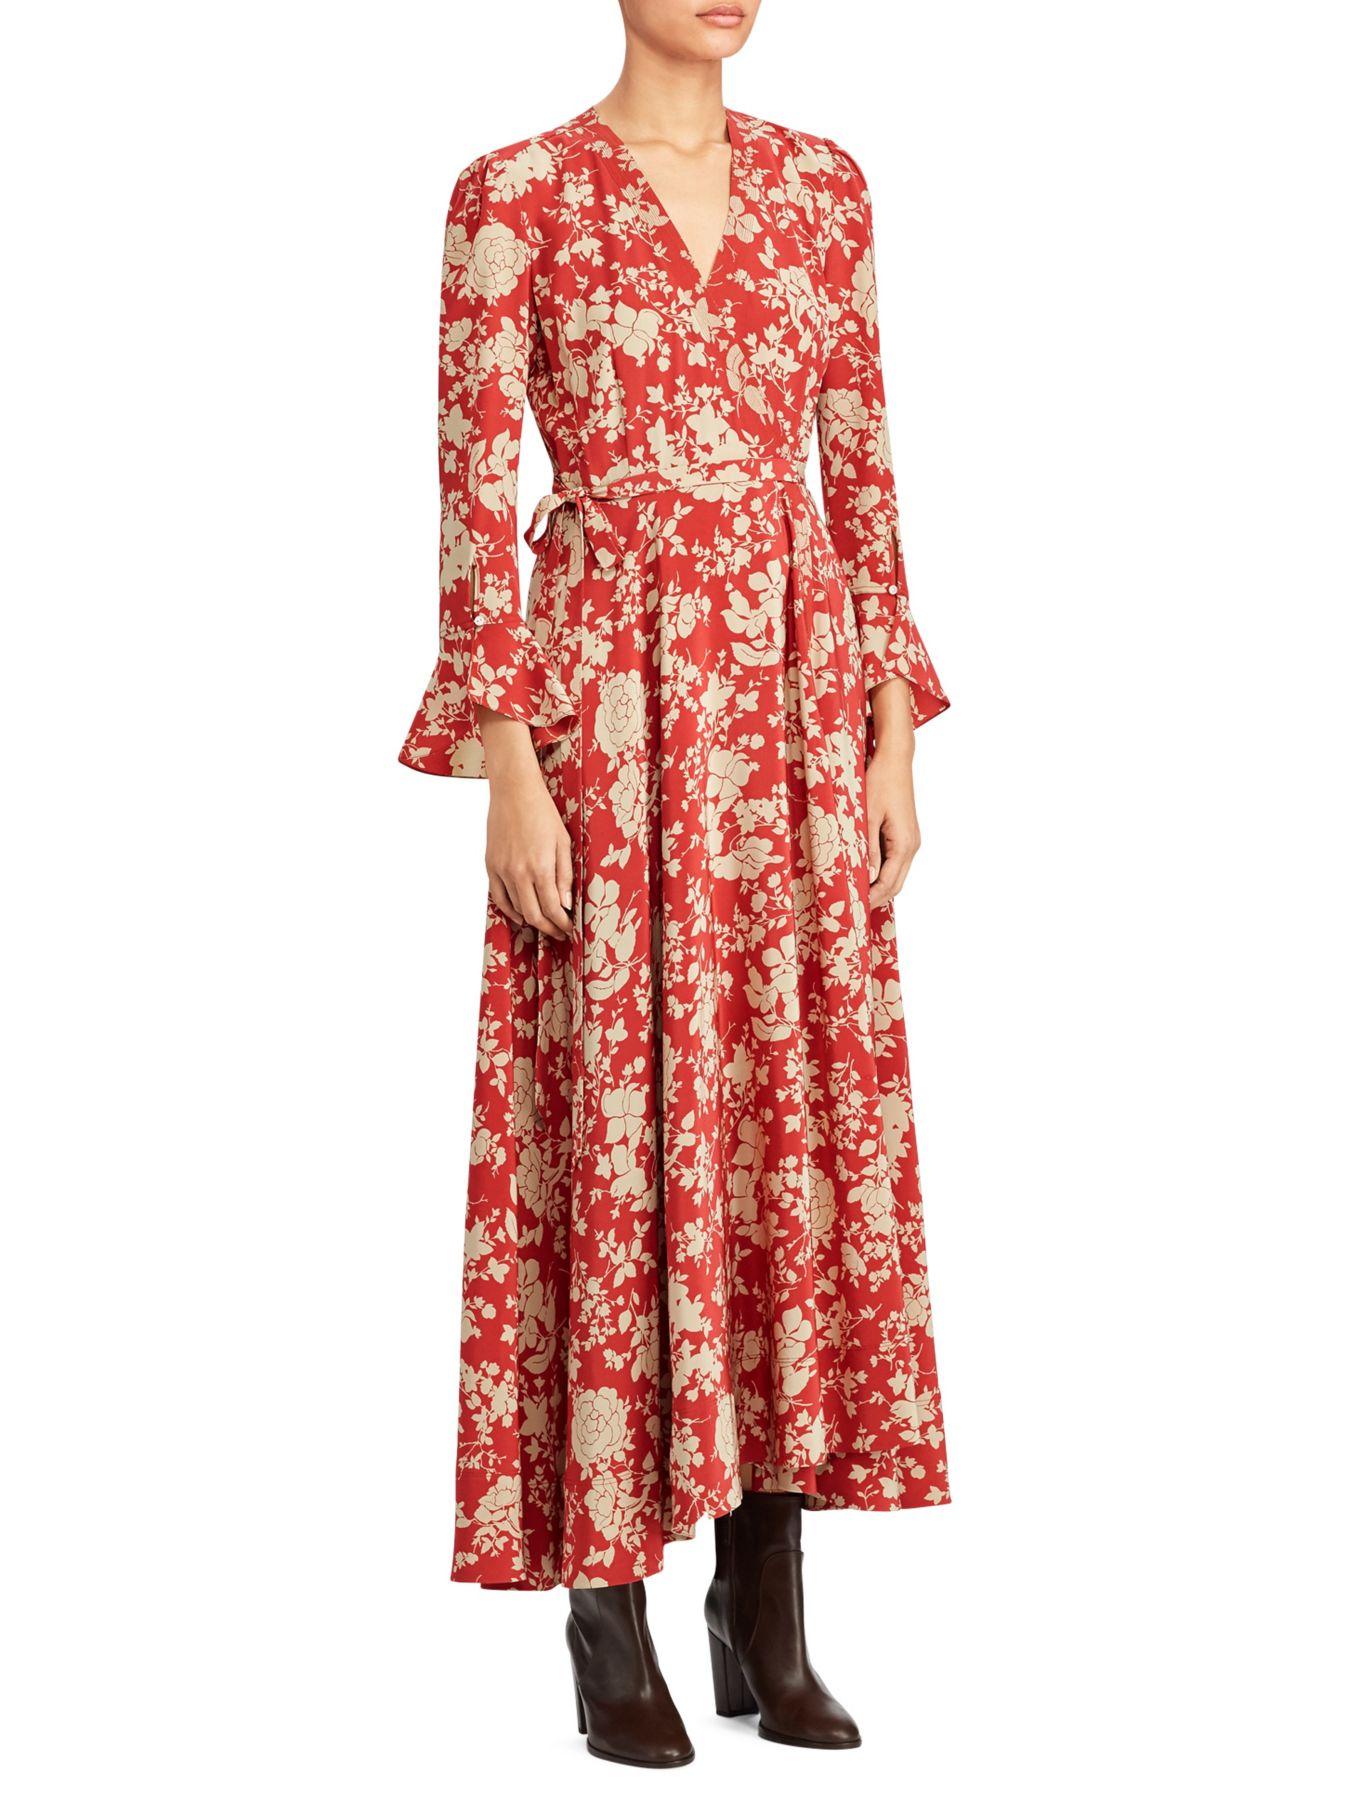 Polo Ralph Lauren Harlow Long-sleeve Floral Maxi Wrap Dress in Red - Lyst